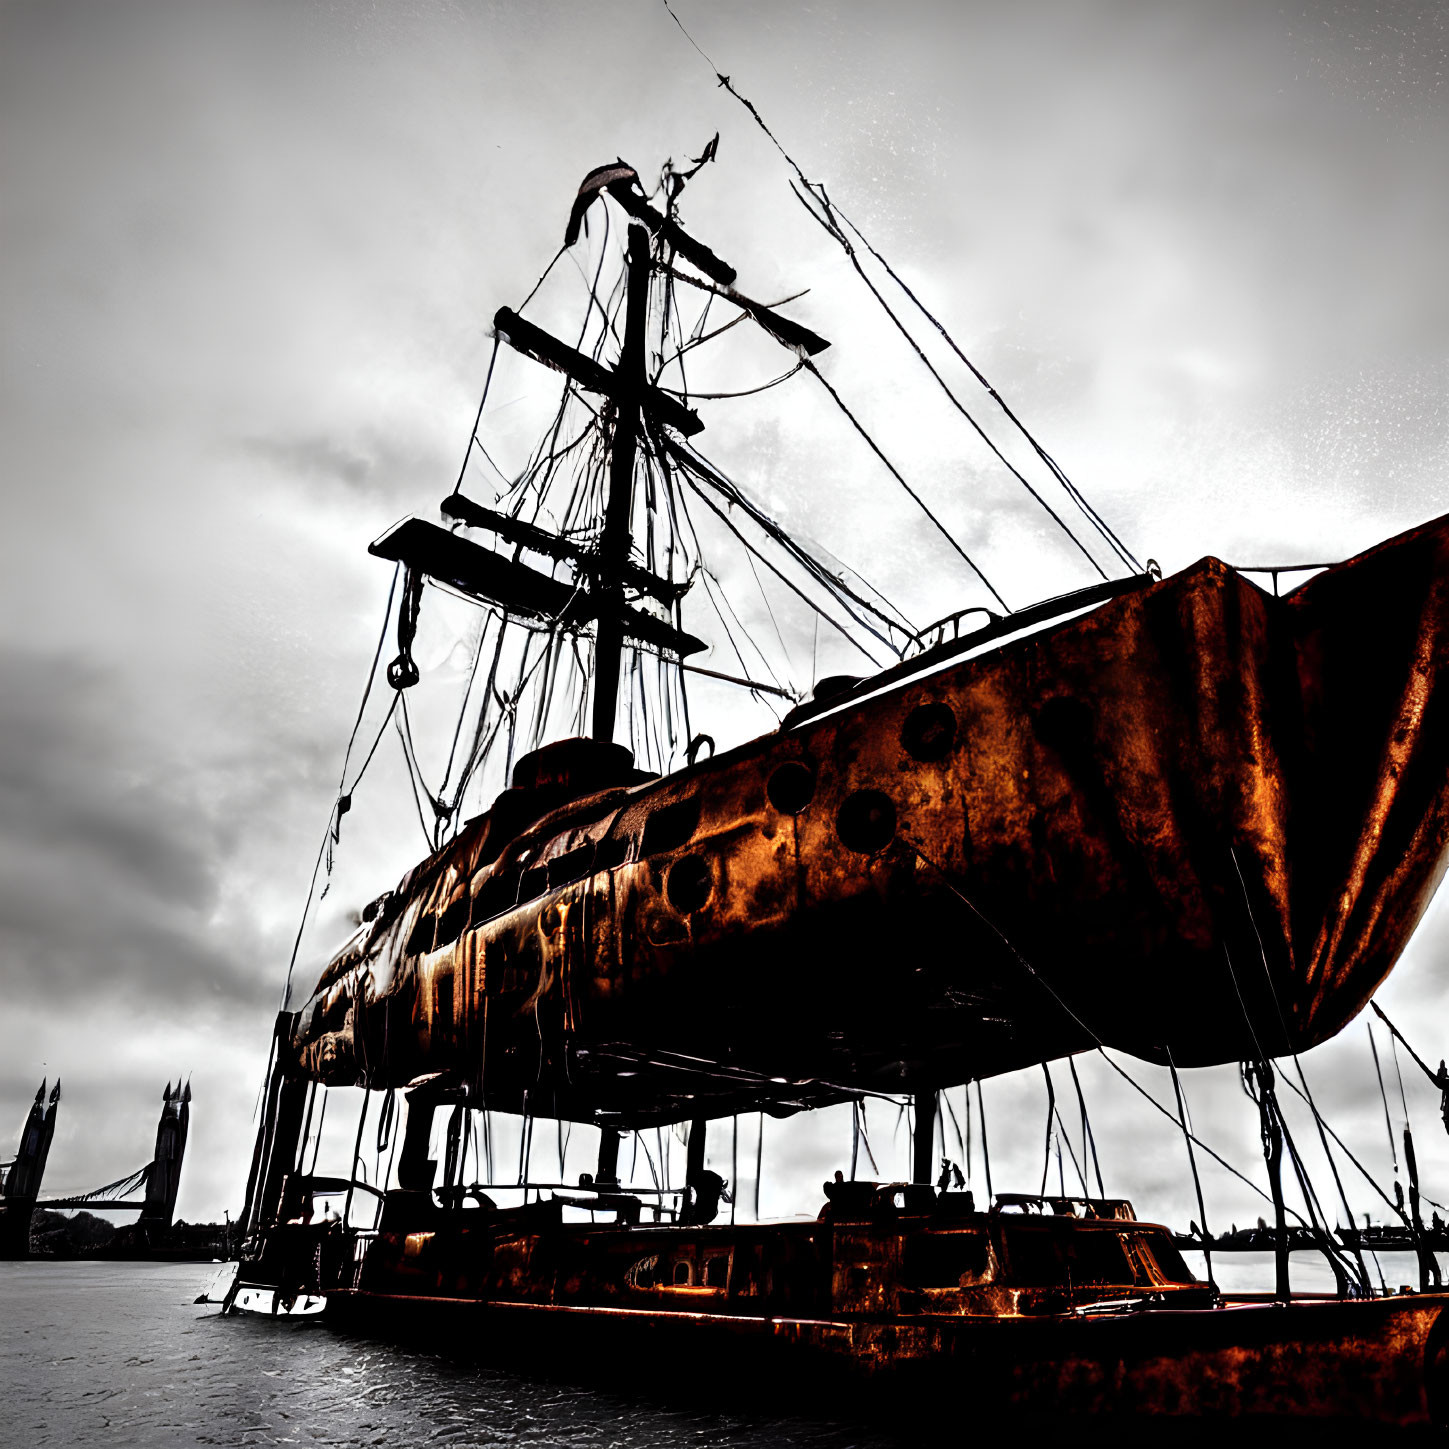 Rusted abandoned ship with tattered sails under cloudy sky